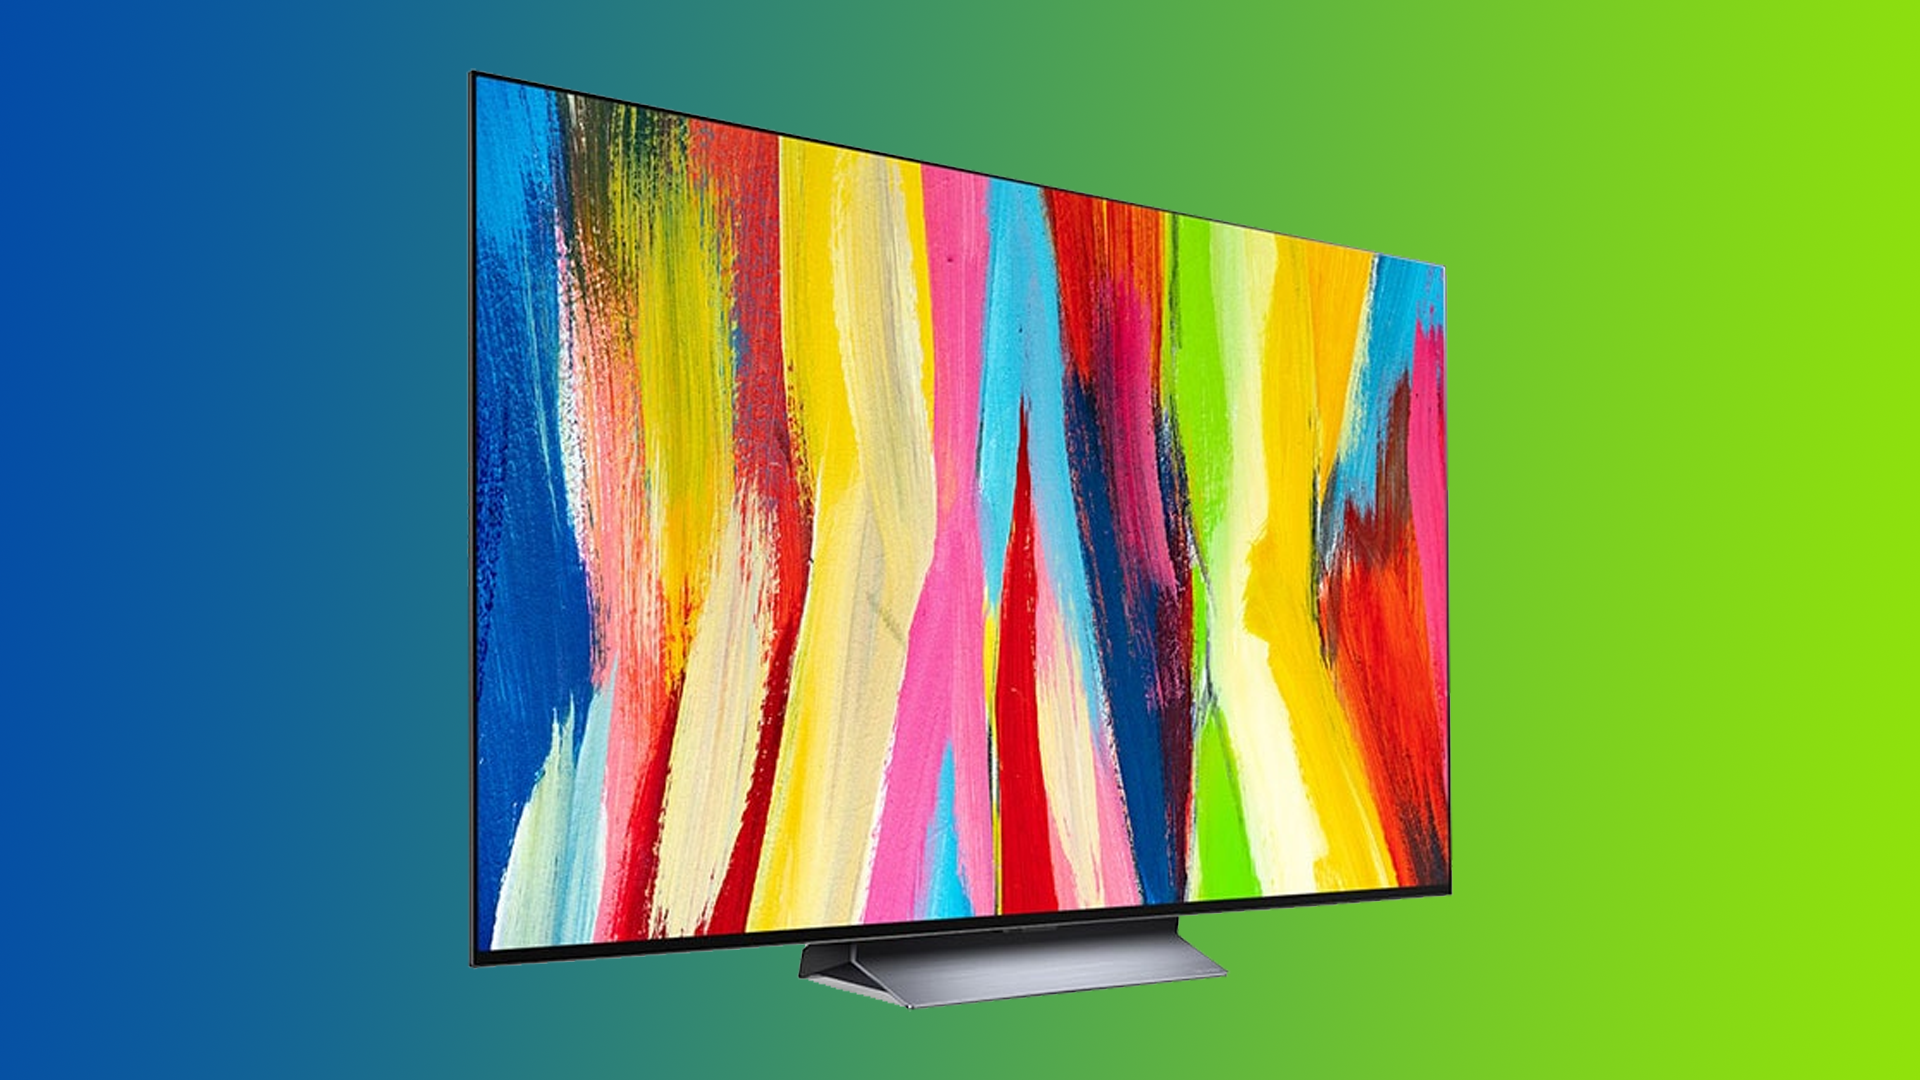 Image of an LG C2 OLED TV on a blue to green gradient background